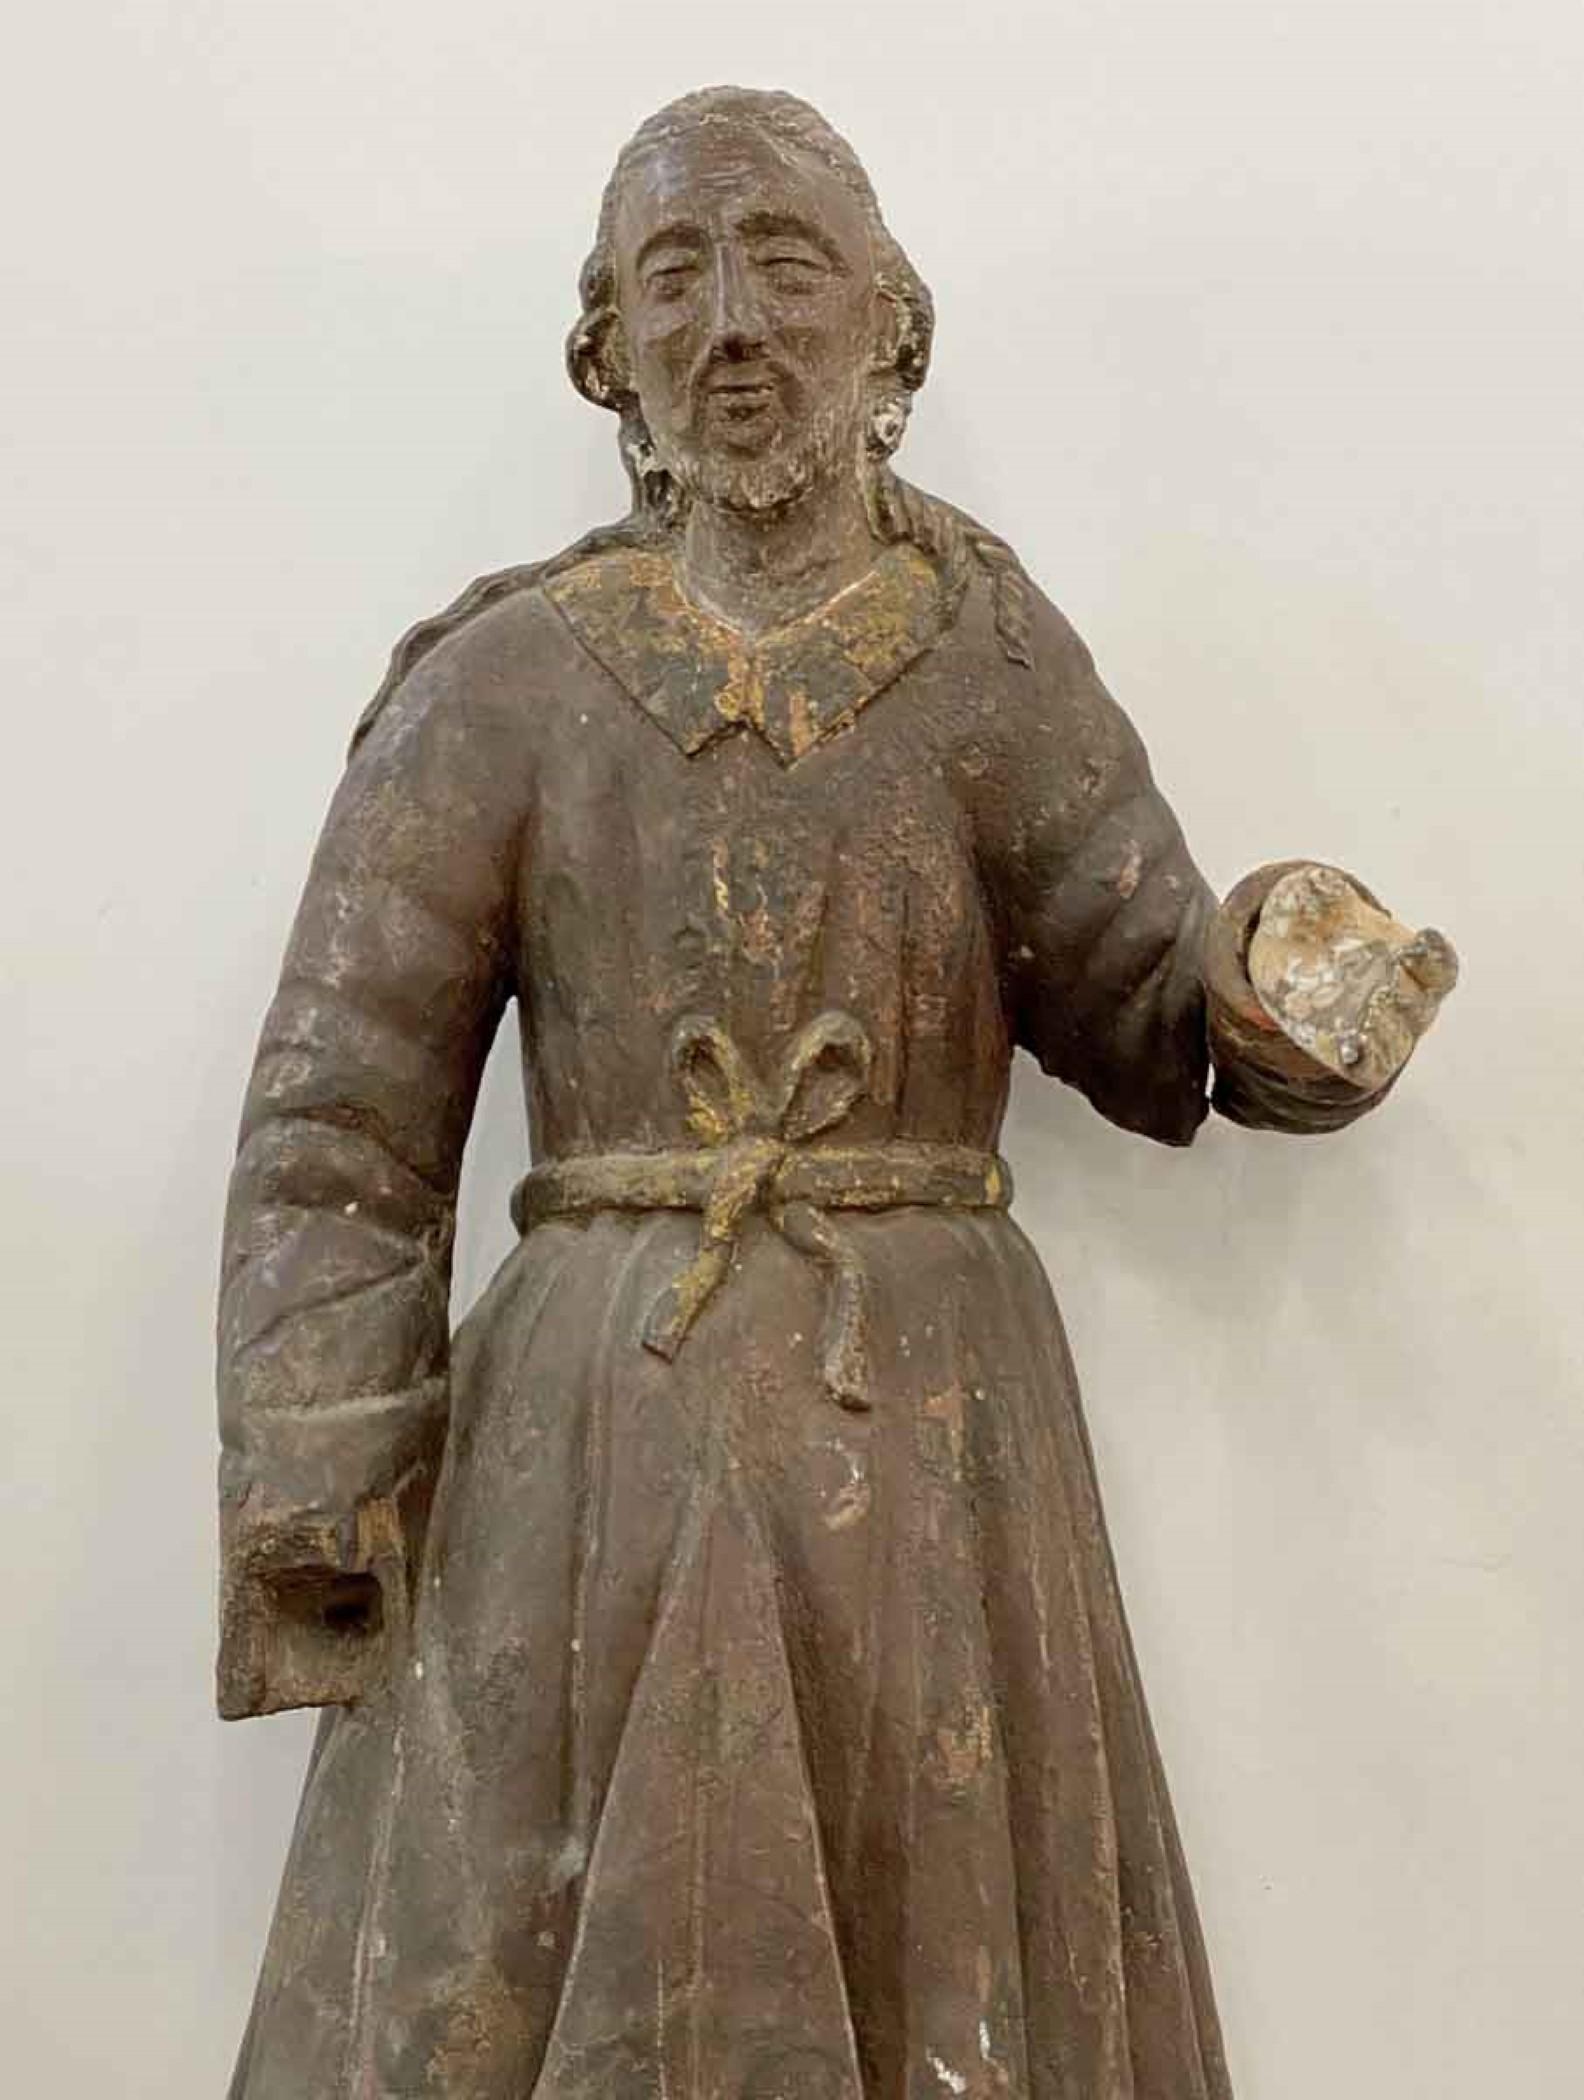 San Isidro was a Madrid born Catholic farmworker known for his piety toward the poor and animals. Antique hand carved wood statue of San Isidro with the original paint. Some damage as shown in the pictures. This can be seen at our 333 West 52nd St